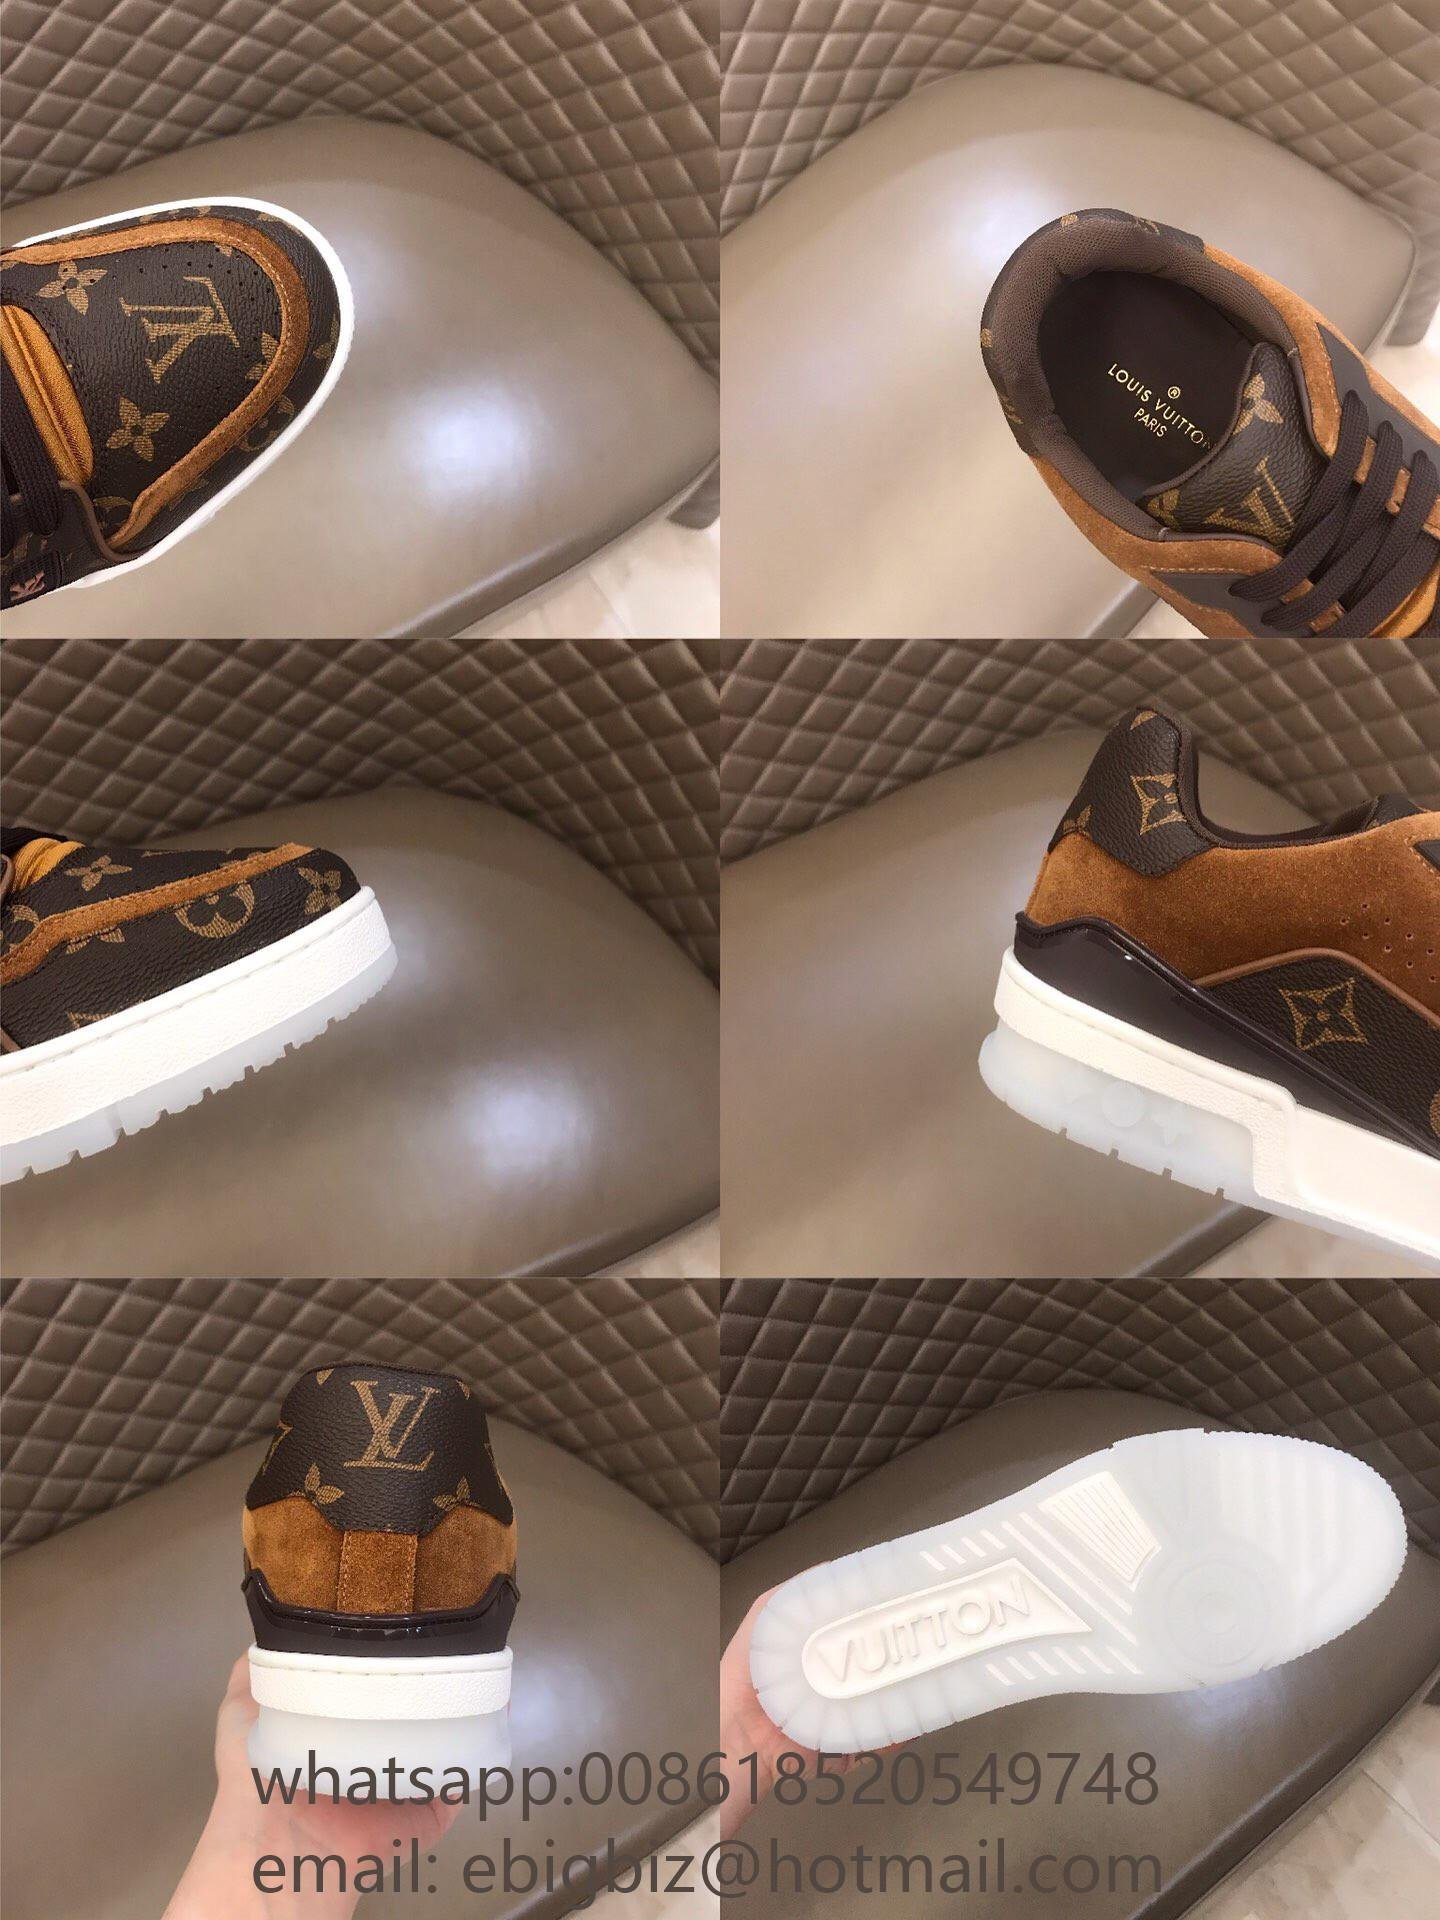 LV Trainer sneakers Cheap LV sneakers for men Louis Vuitton shoes online outlet (China Trading ...